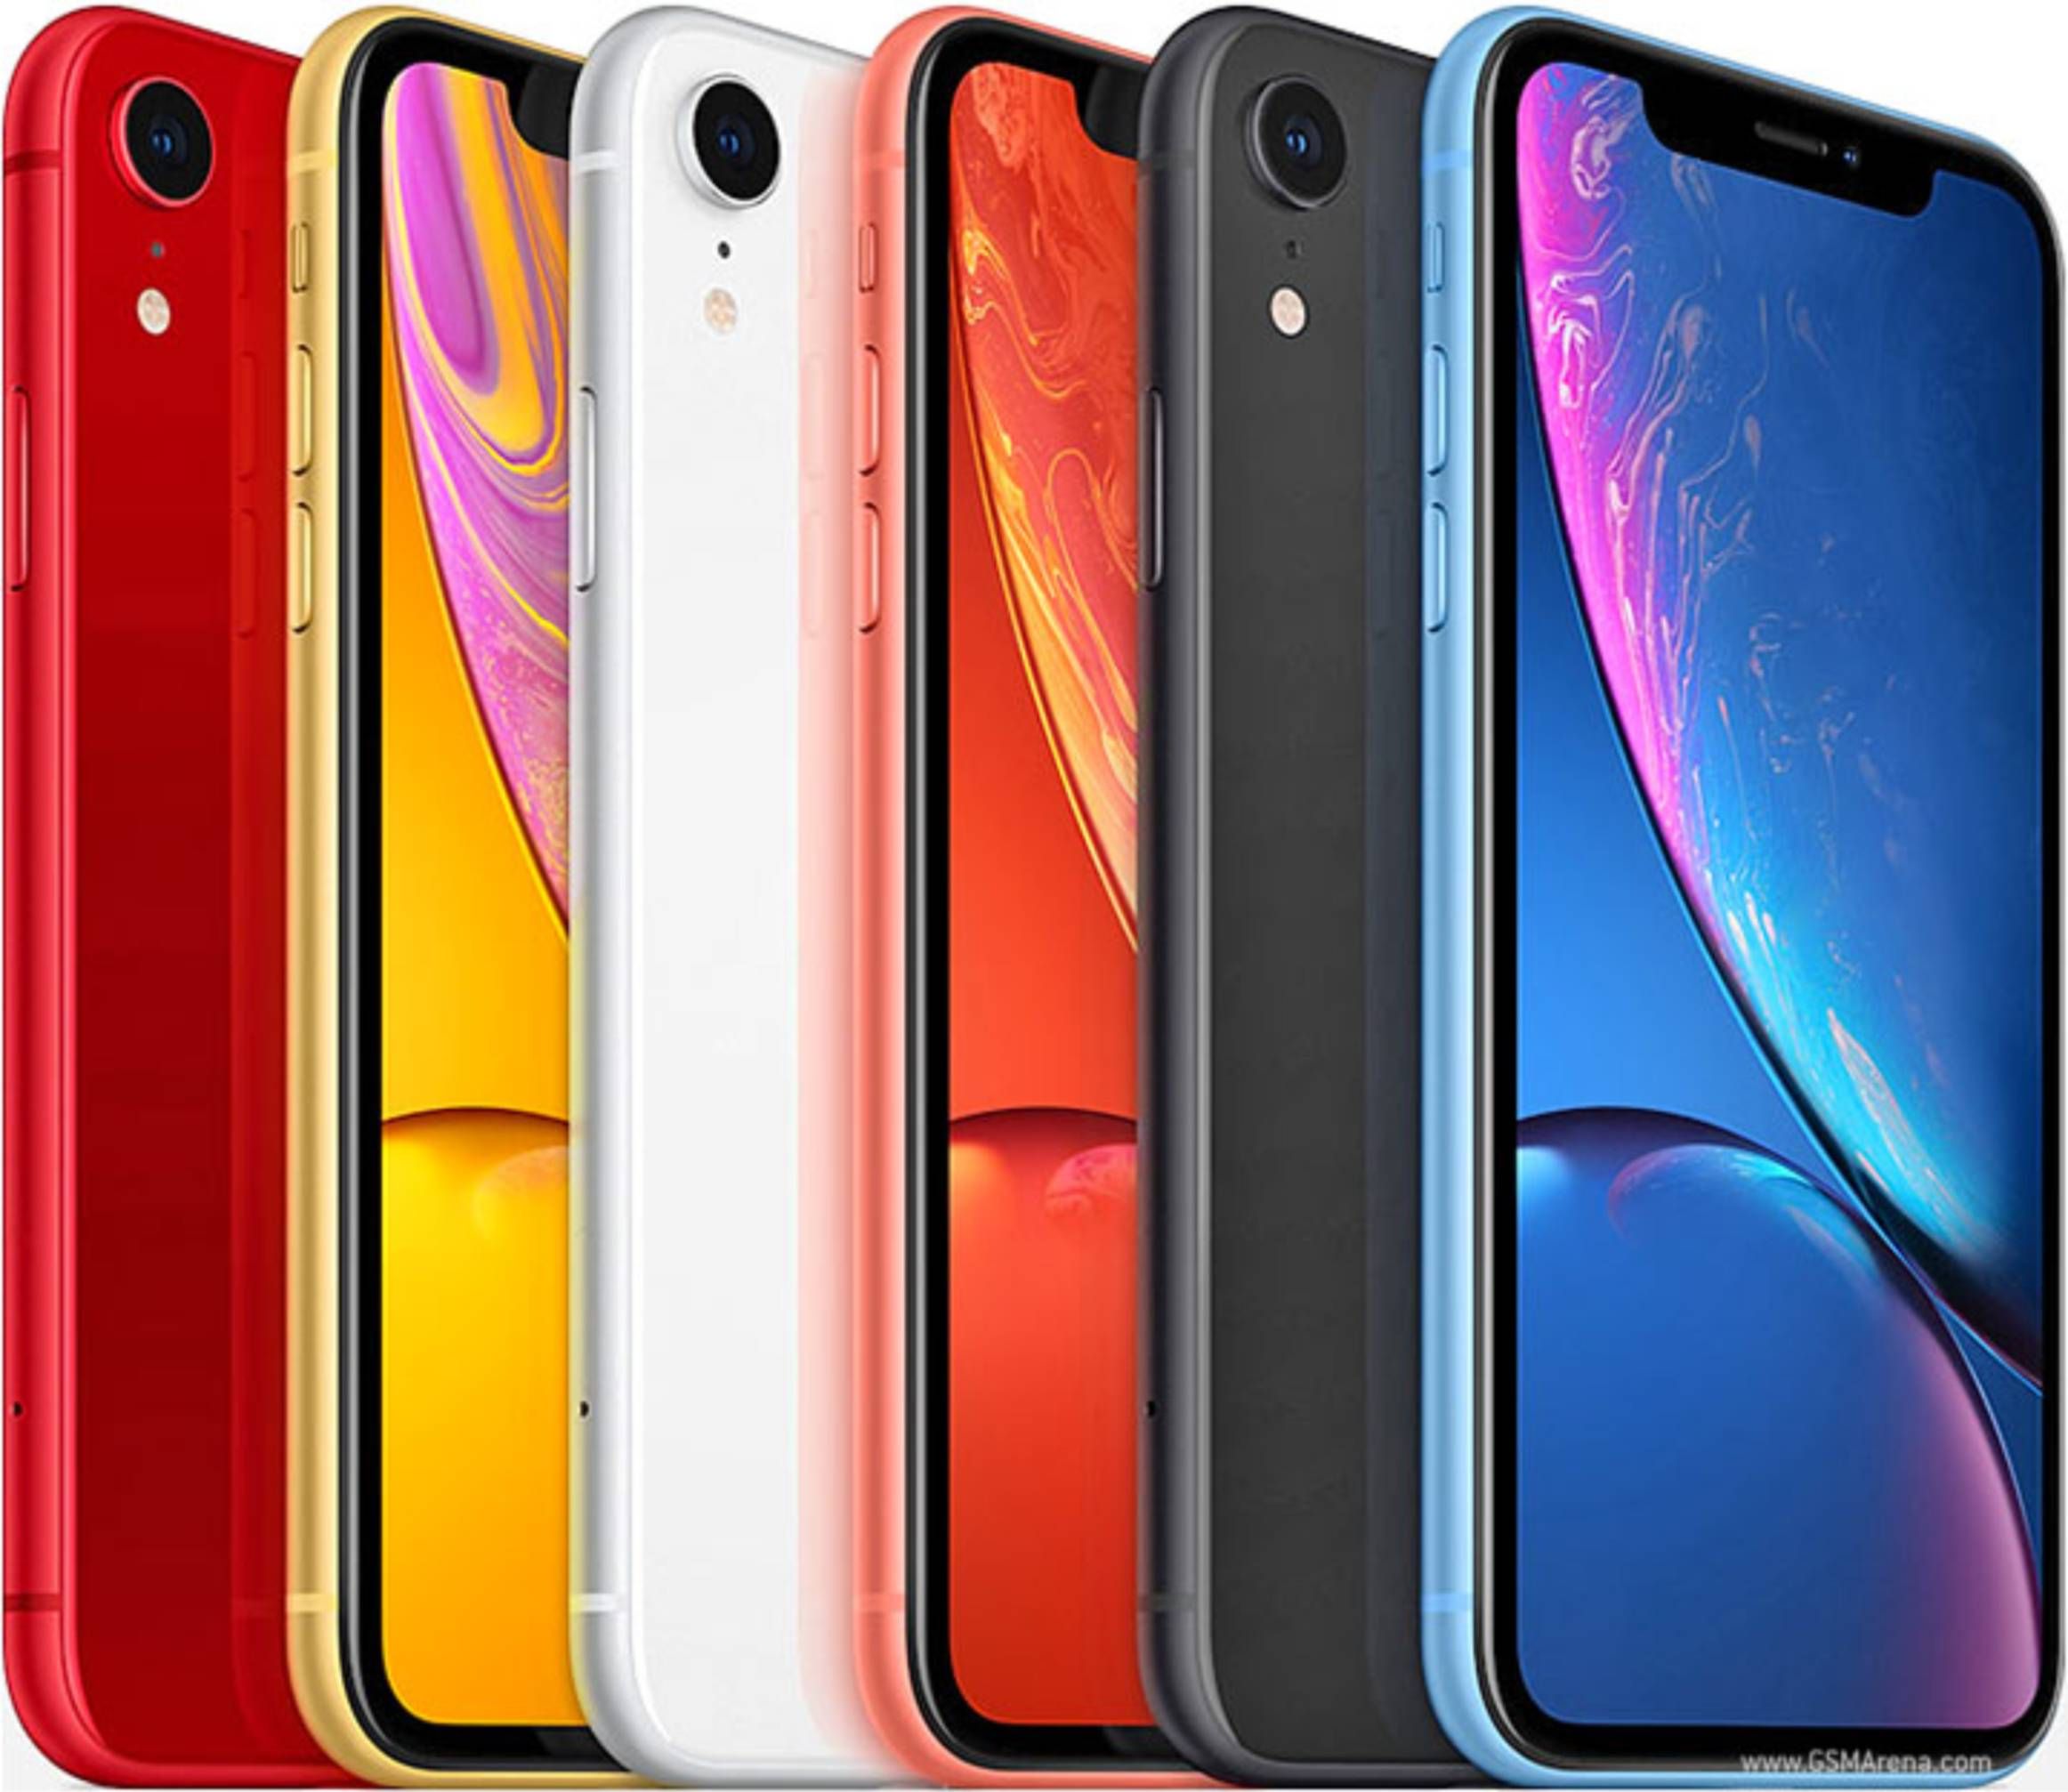 Apple iPhone XR Specifications and Price in Kenya